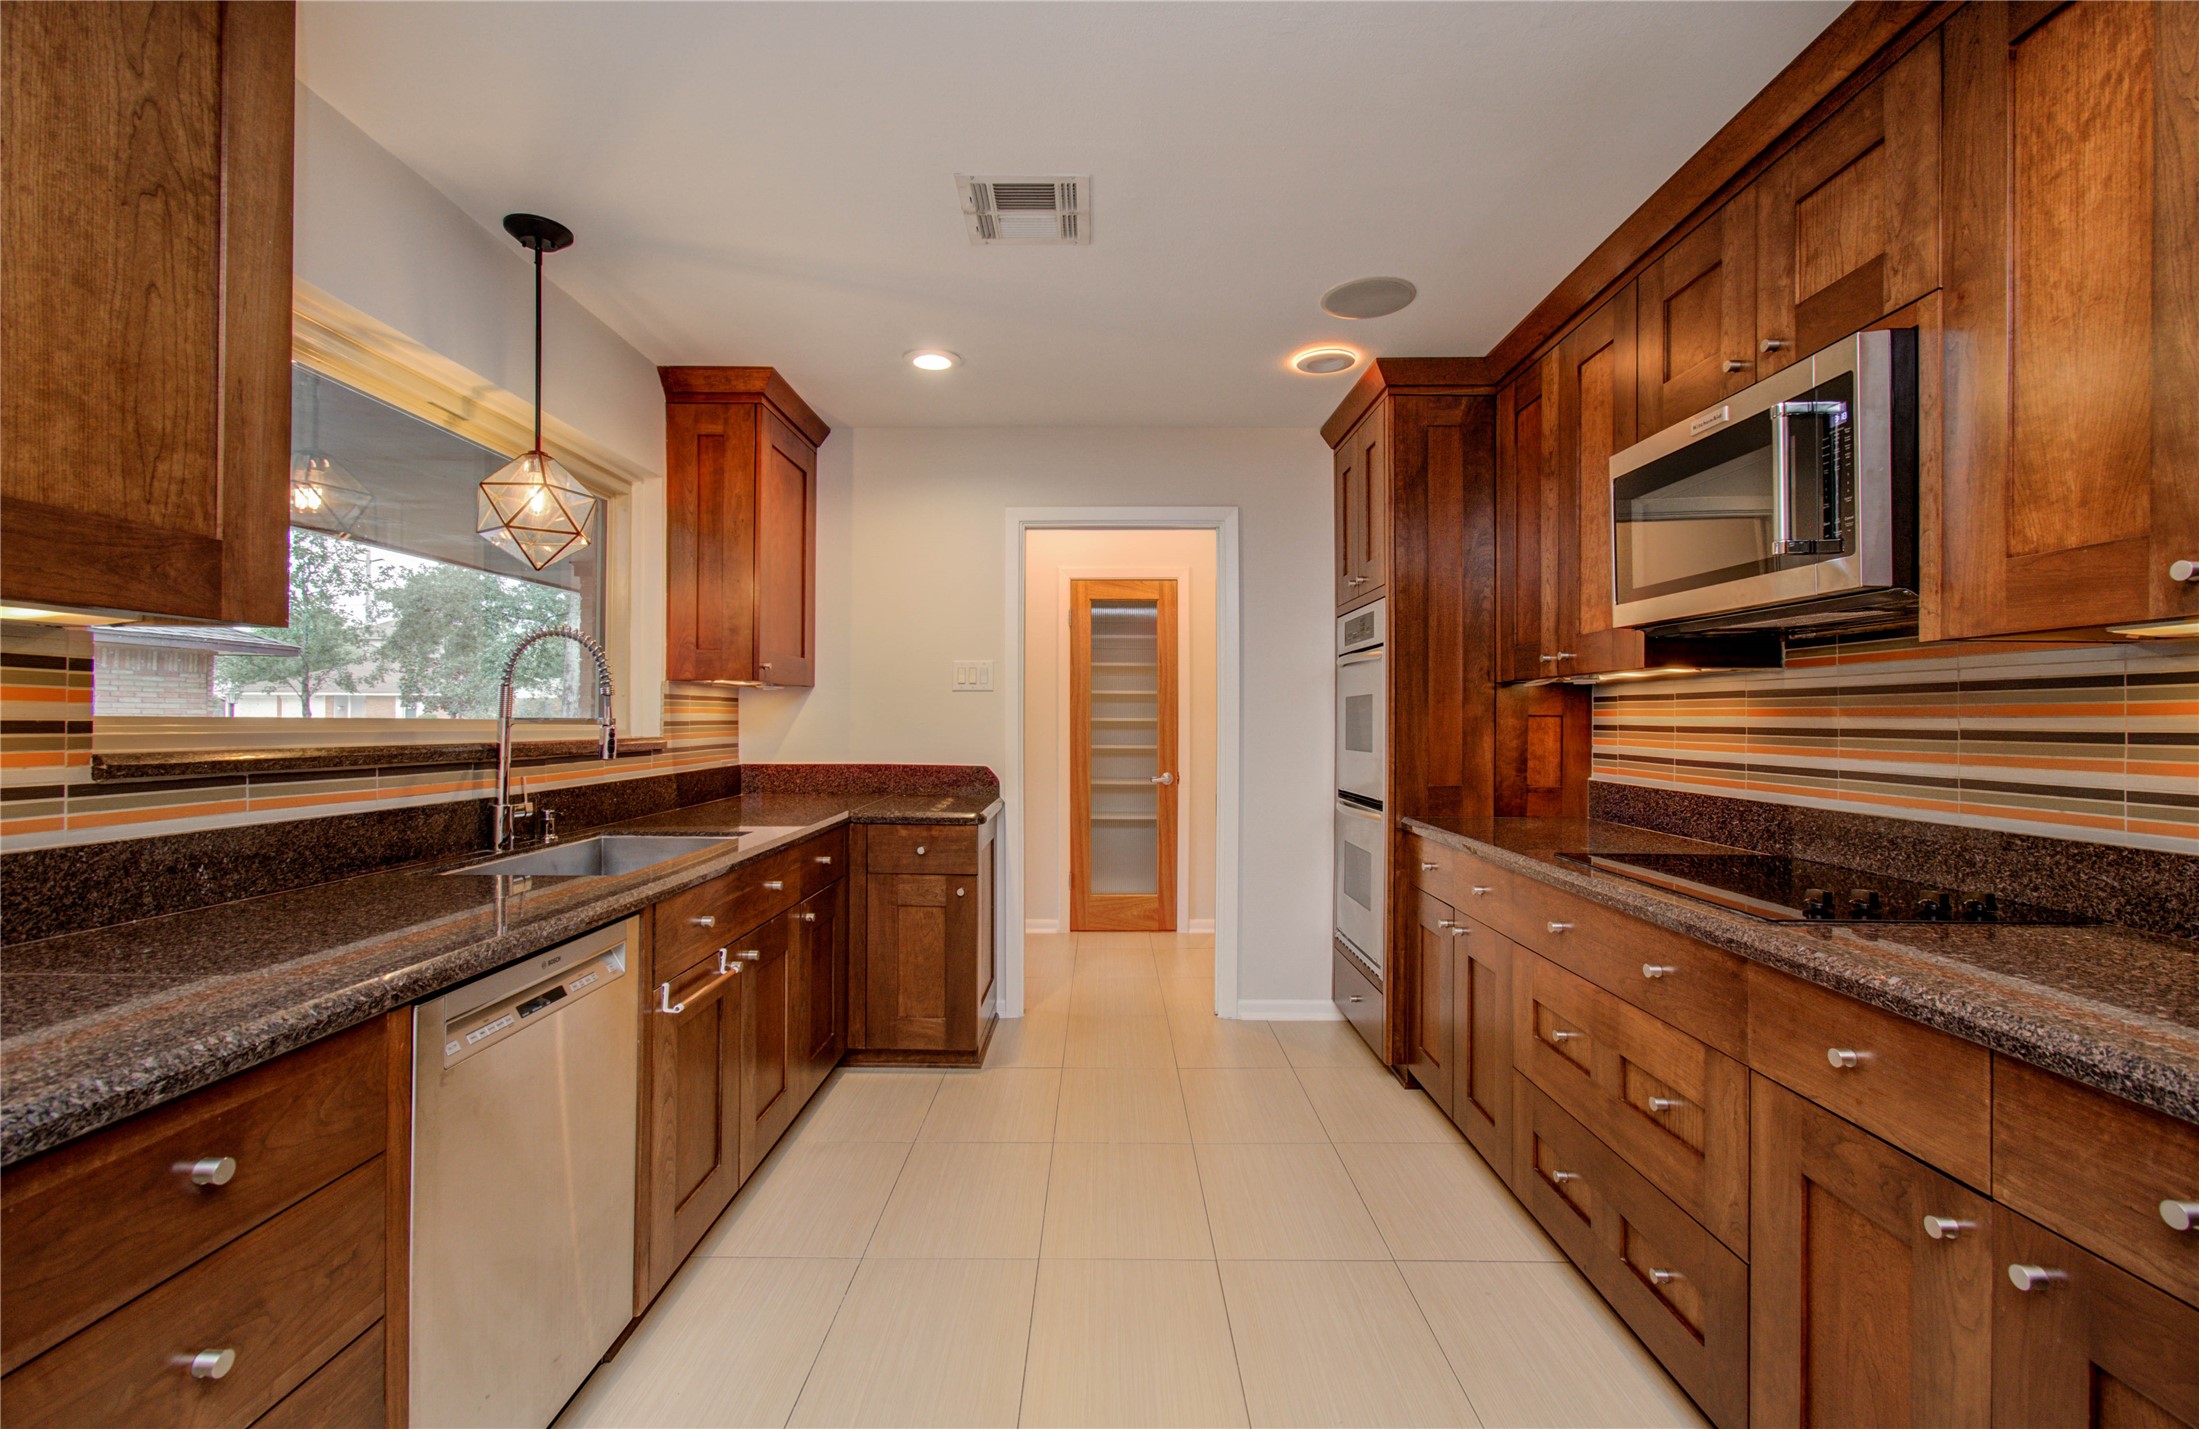 The kitchen showcases top-tier stainless steel appliances. Yet, even with these contemporary enhancements, the owners skillfully maintained the room's standout feature: a distinctively captivating backsplash that harmoniously contrasts the warm, rich tones of the wooden cabinets.